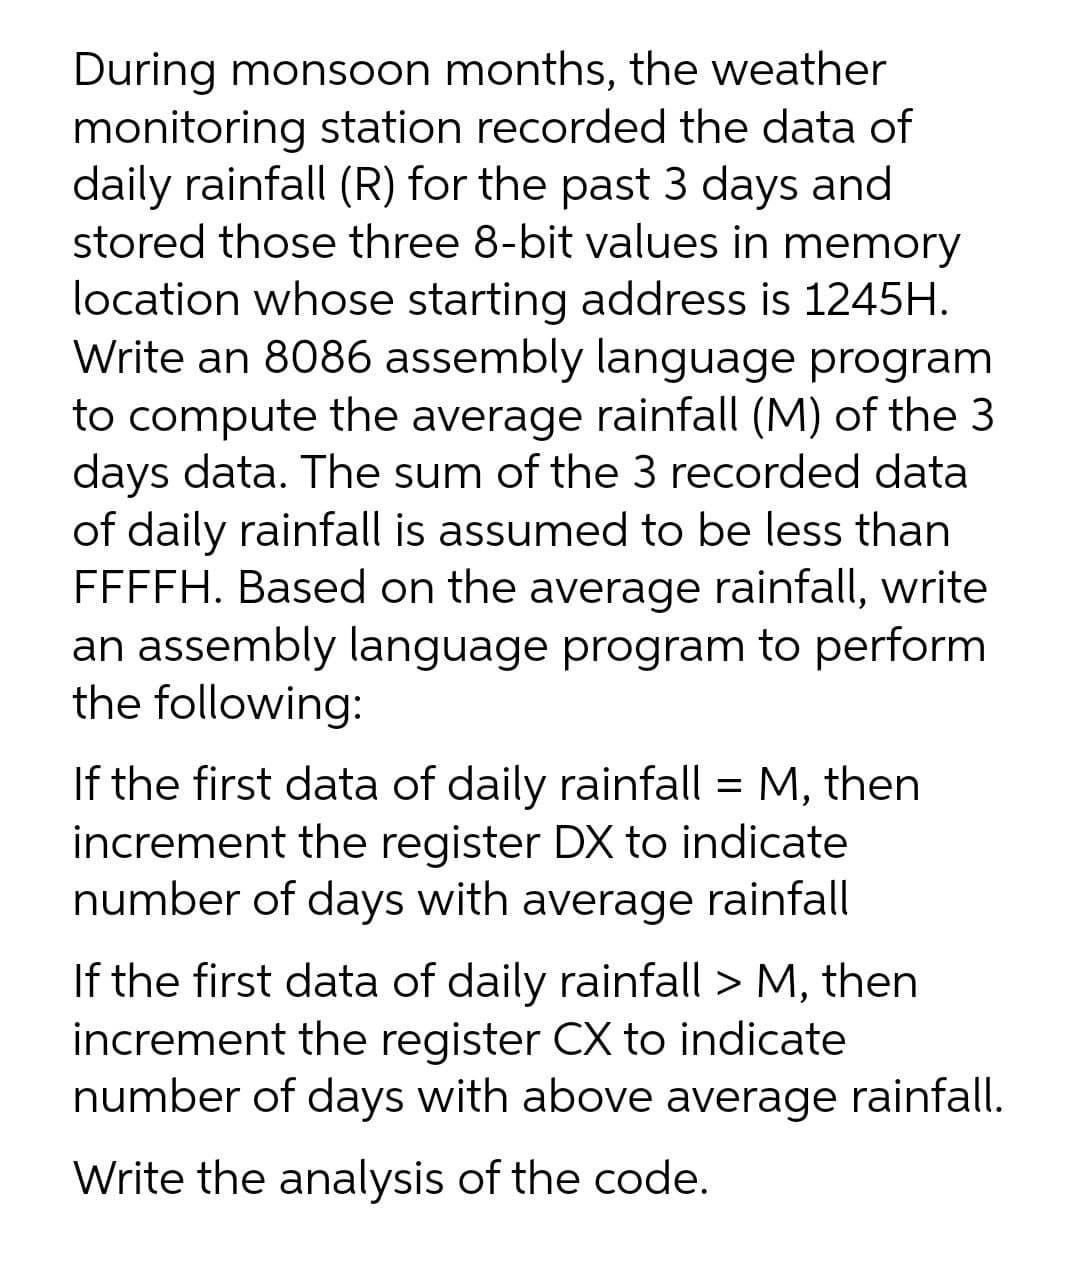 During monsoon months, the weather
monitoring station recorded the data of
daily rainfall (R) for the past 3 days and
stored those three 8-bit values in memory
location whose starting address is 1245H.
Write an 8086 assembly language program
to compute the average rainfall (M) of the 3
days data. The sum of the 3 recorded data
of daily rainfall is assumed to be less than
FFFFH. Based on the average rainfall, write
an assembly language program to perform
the following:
If the first data of daily rainfall = M, then
increment the register DX to indicate
number of days with average rainfall
If the first data of daily rainfall > M, then
increment the register CX to indicate
number of days with above average rainfall.
Write the analysis of the code.
